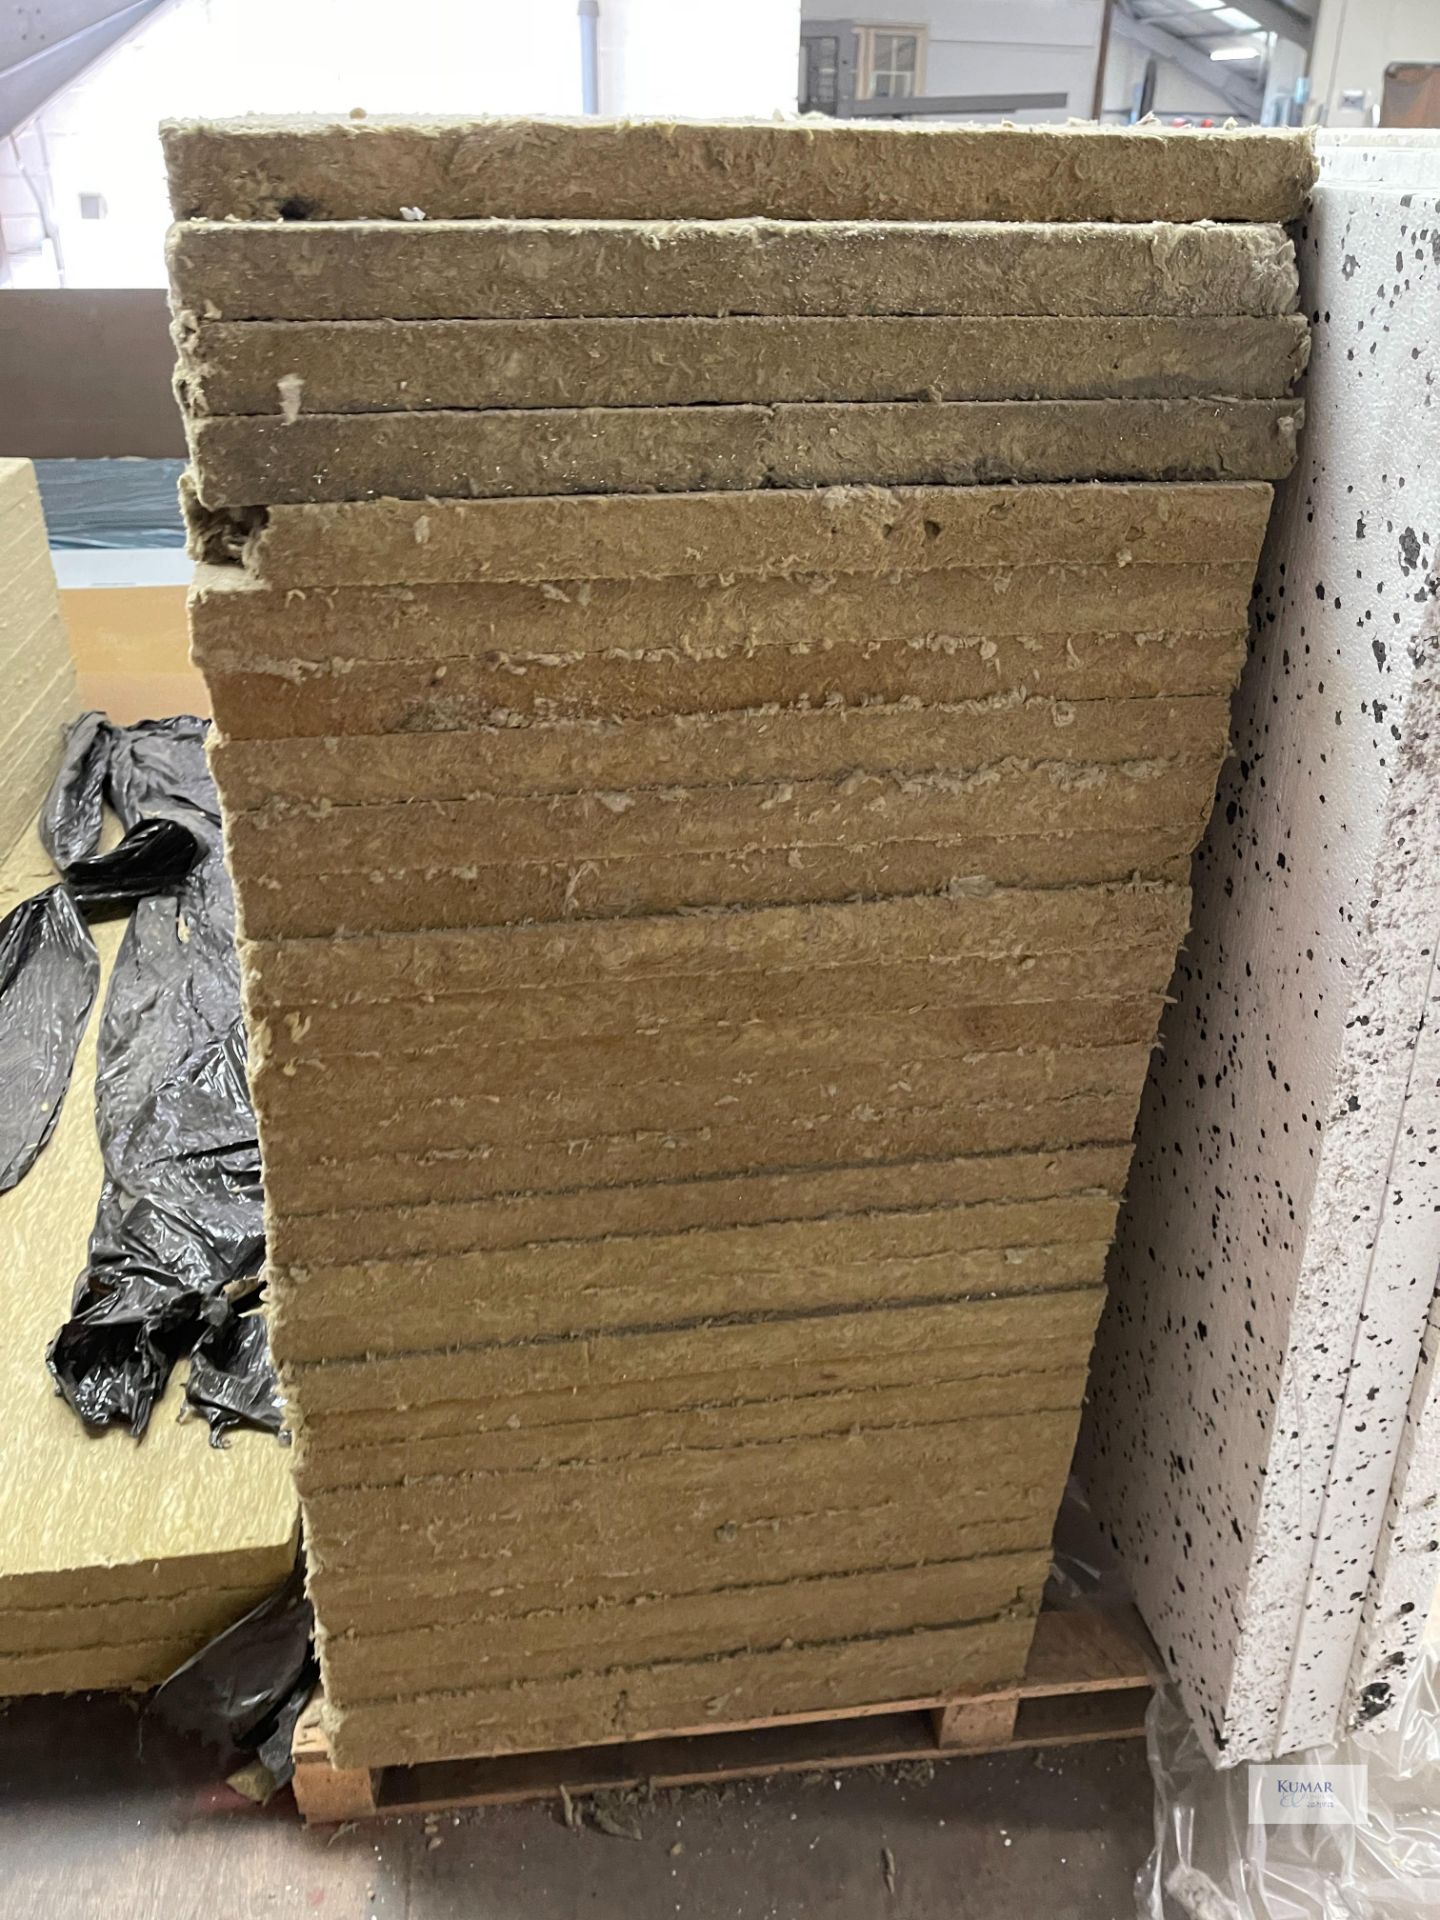 Quantity of RWA Rockwool A1 Non Combustible Insulation & 3: Sheets of Insulation Foam - Image 4 of 6